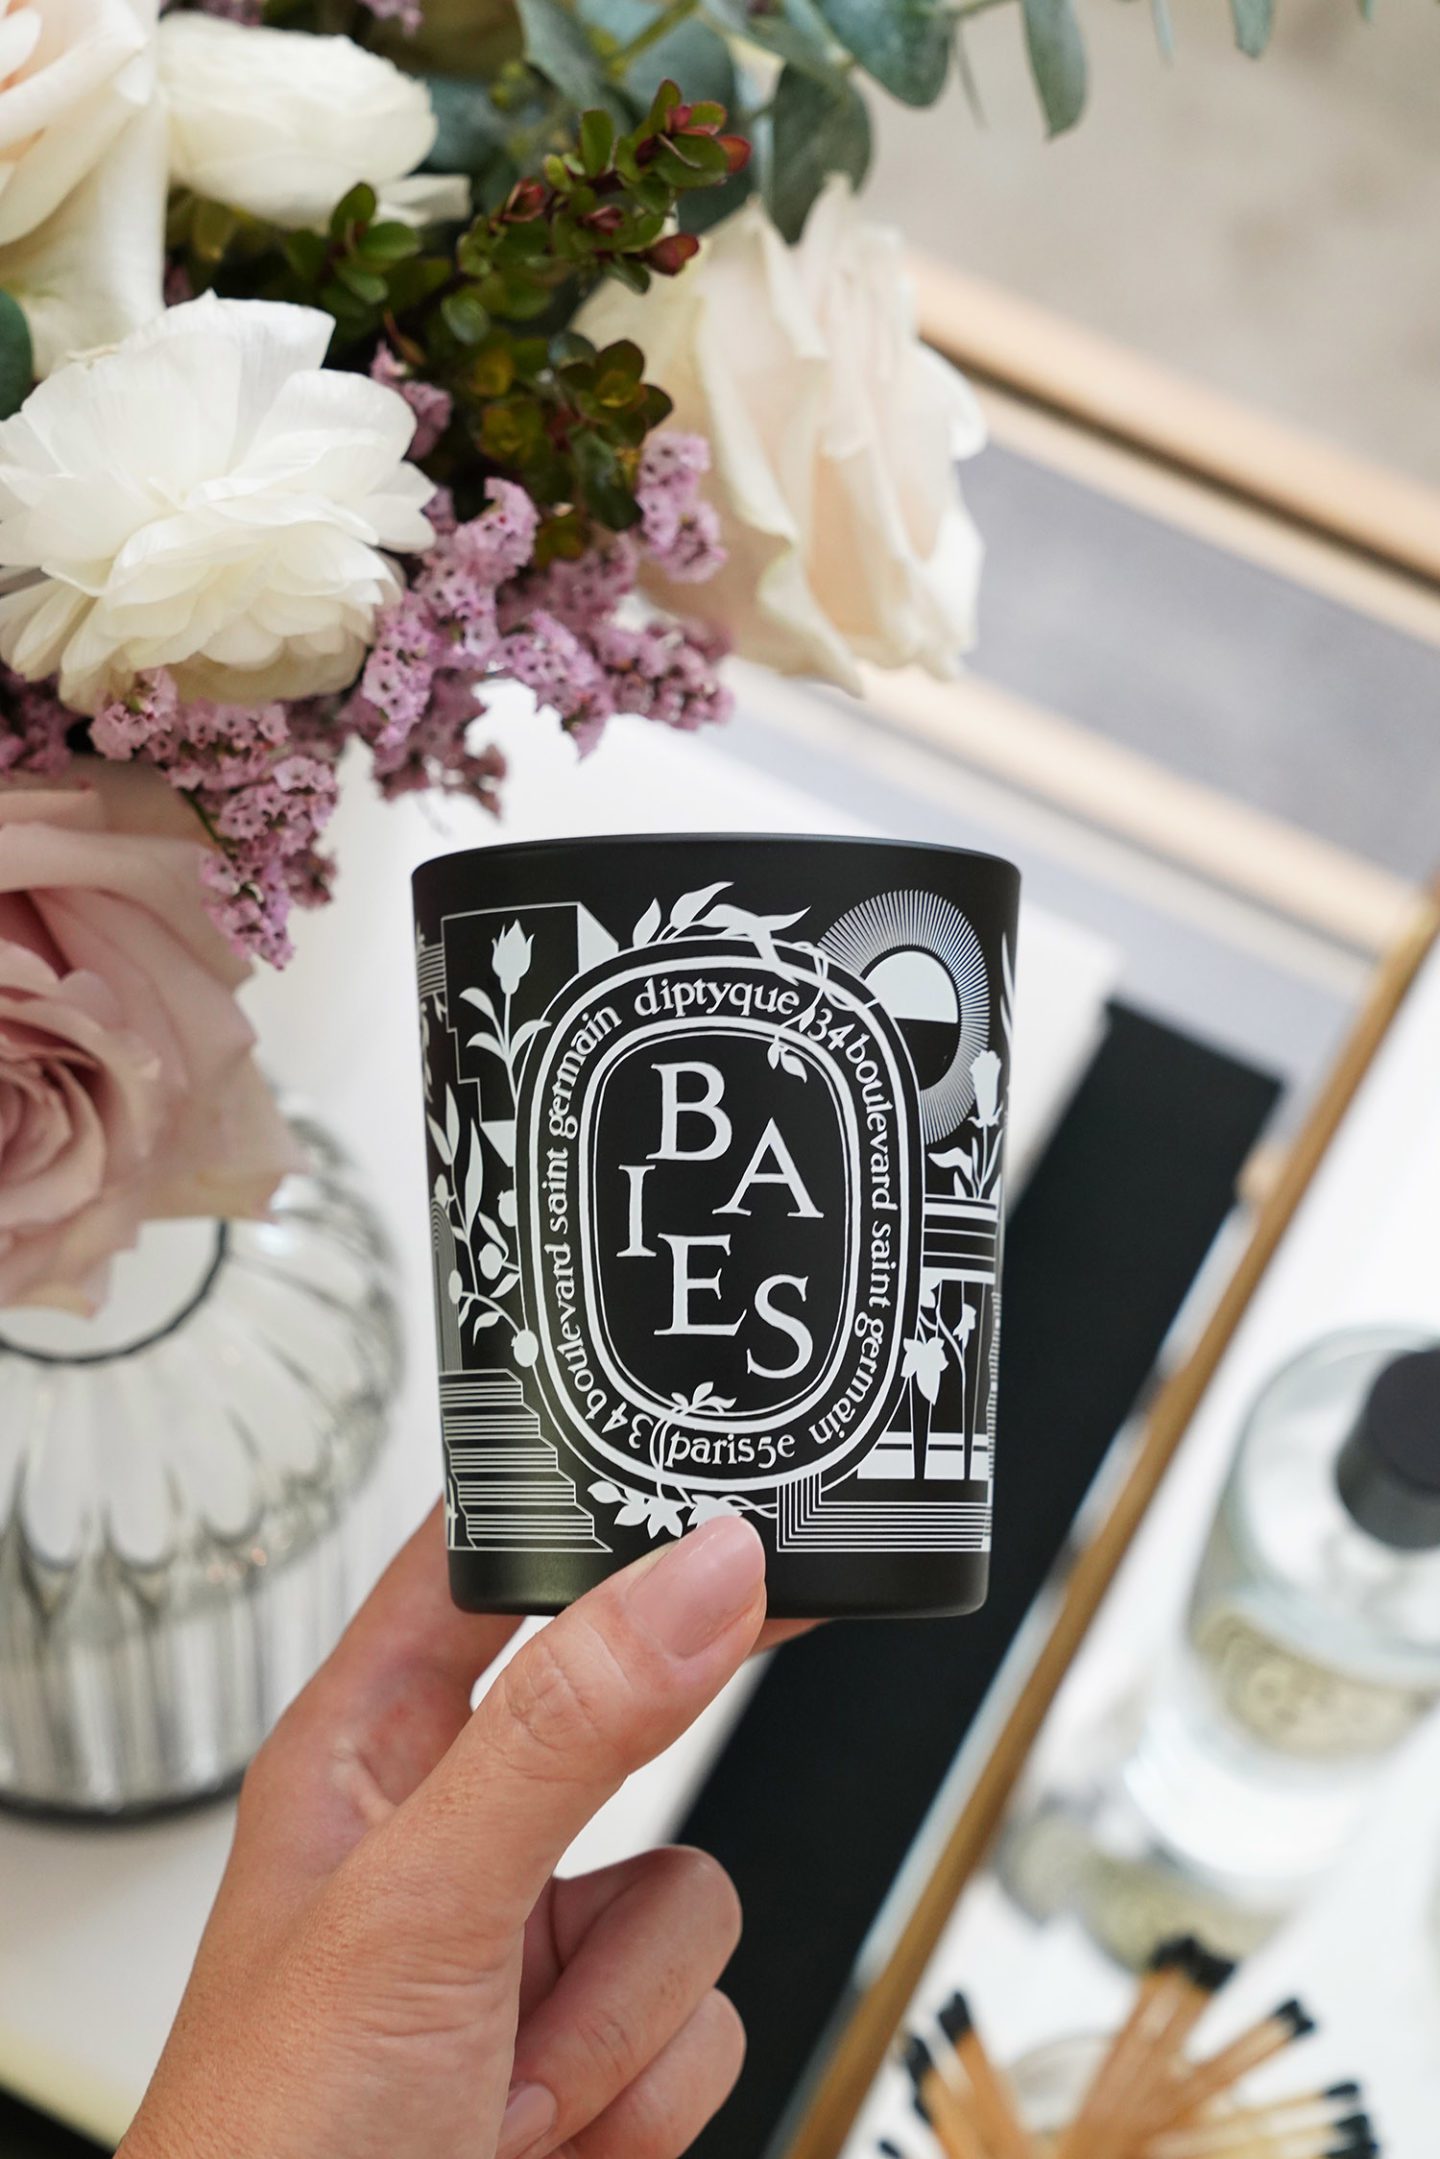 Diptyque Black Friday Baies Candle 2020 | The Beauty Lookbook